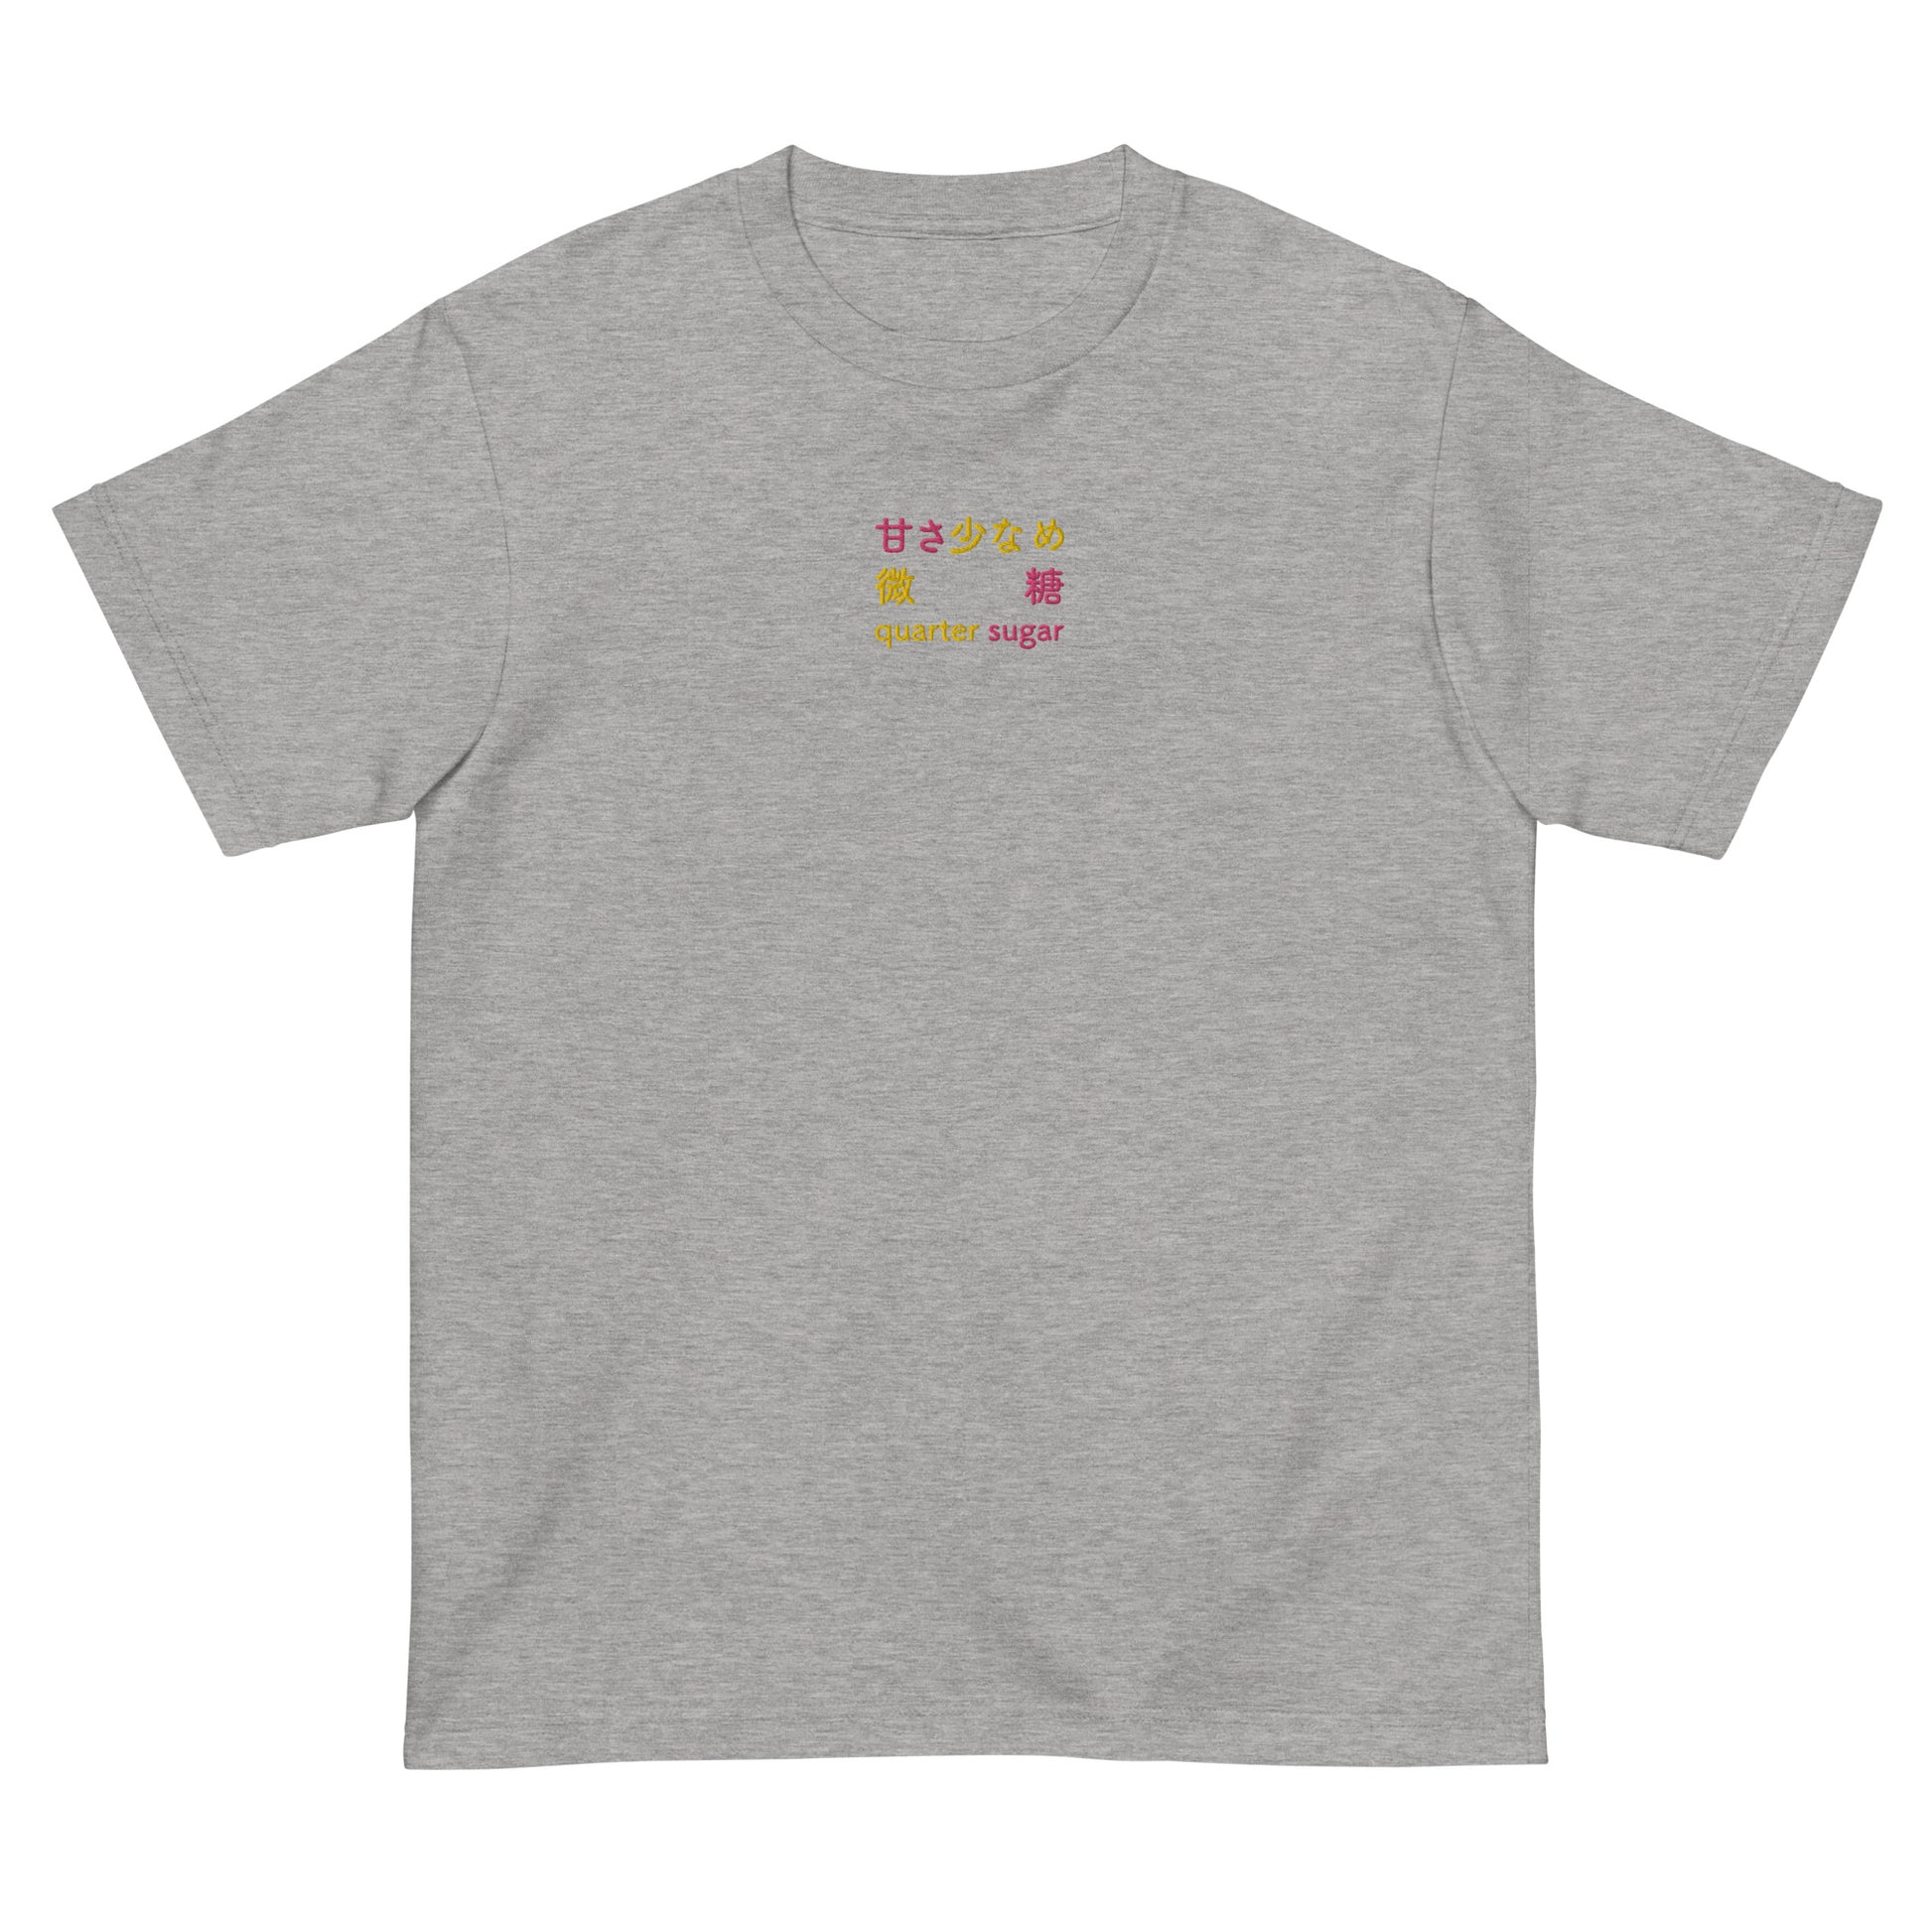 Light Gray High Quality Tee - Front Design with an Yellow, Pink Embroidery "Quarter Sugar" in Japanese,Chinese and English